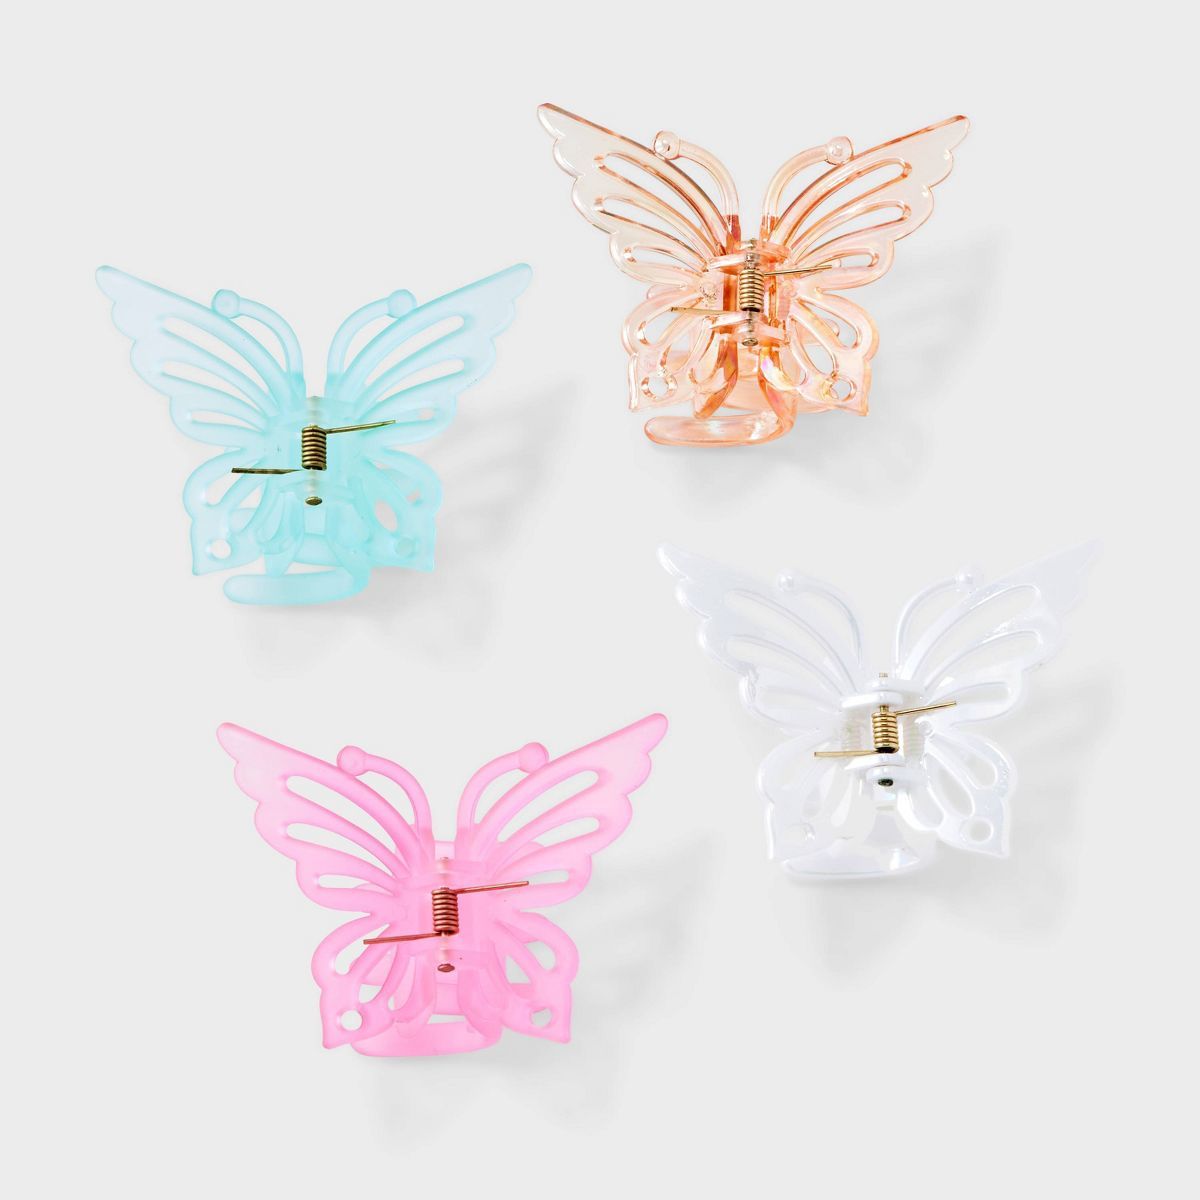 Iridescent Butterfly Claw Hair Clip Set 4pc - Wild Fable™ Pink/Teal/Neutral | Target